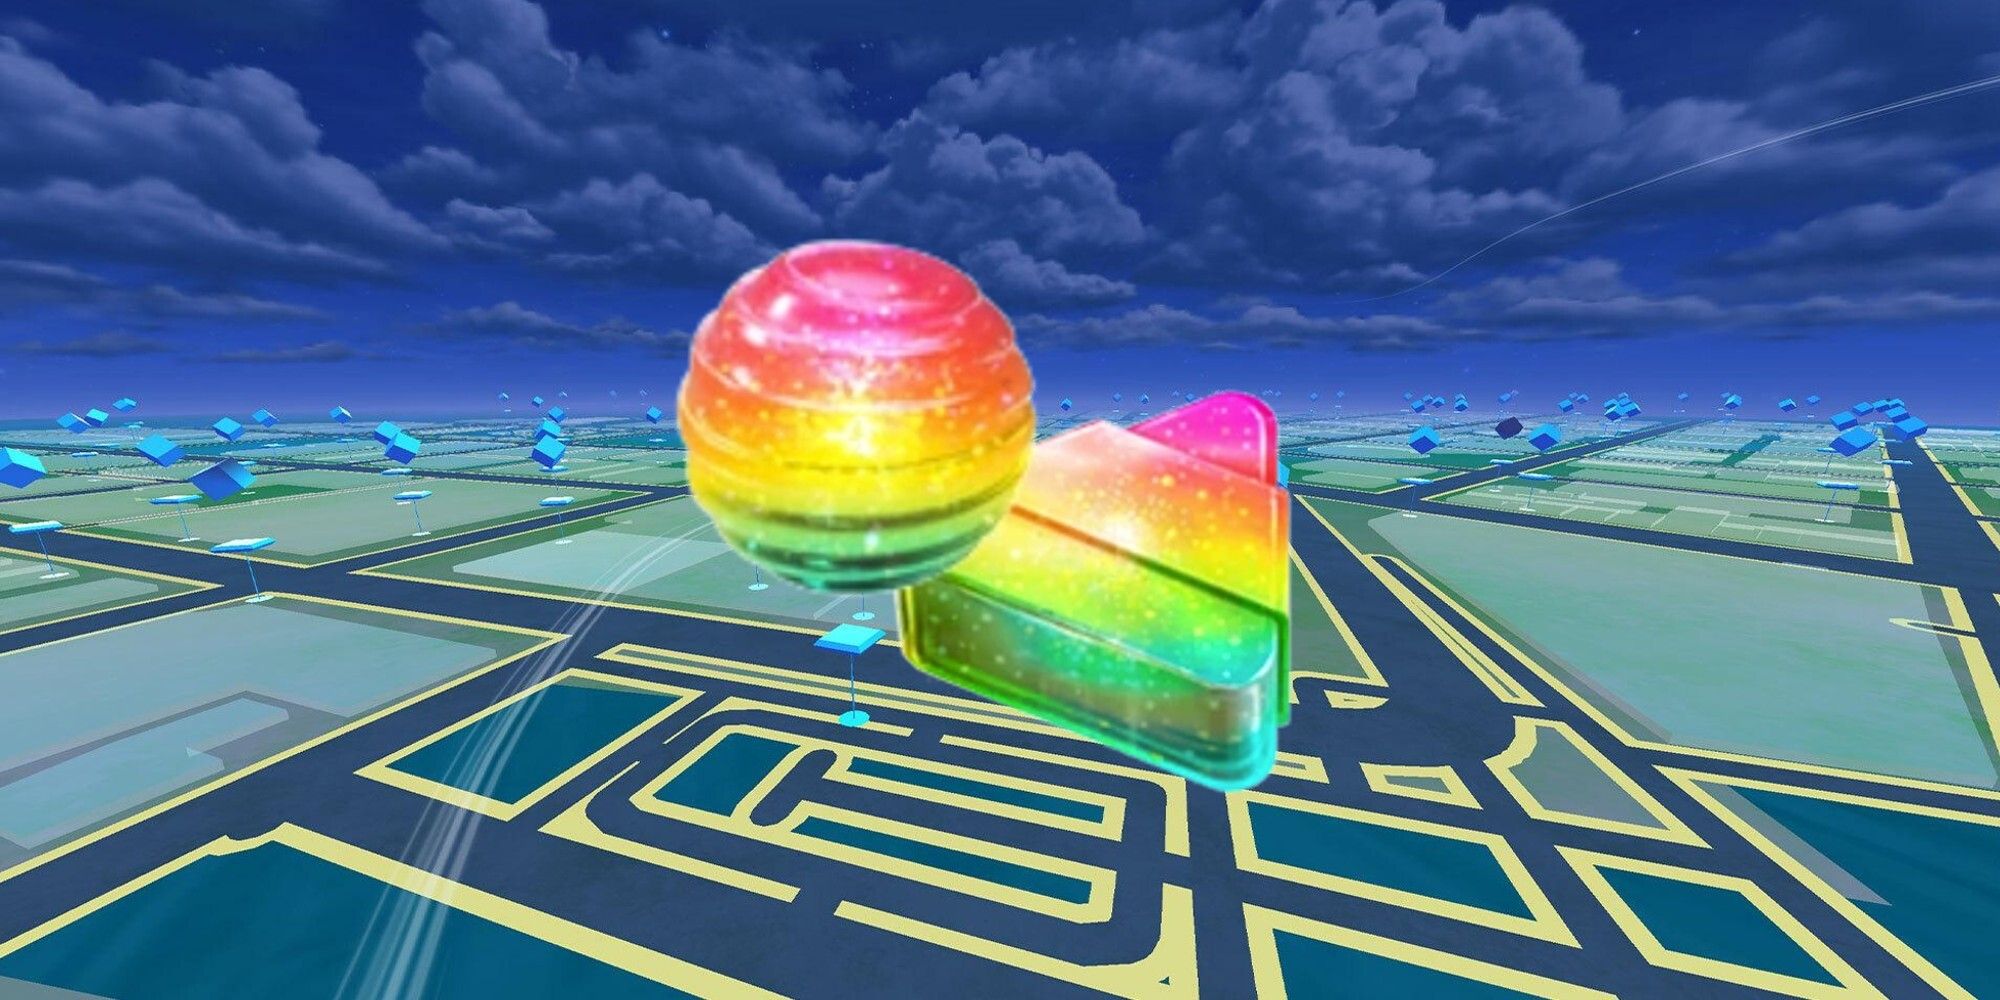 Pokemon Go Rare Candy with pokestops in the background